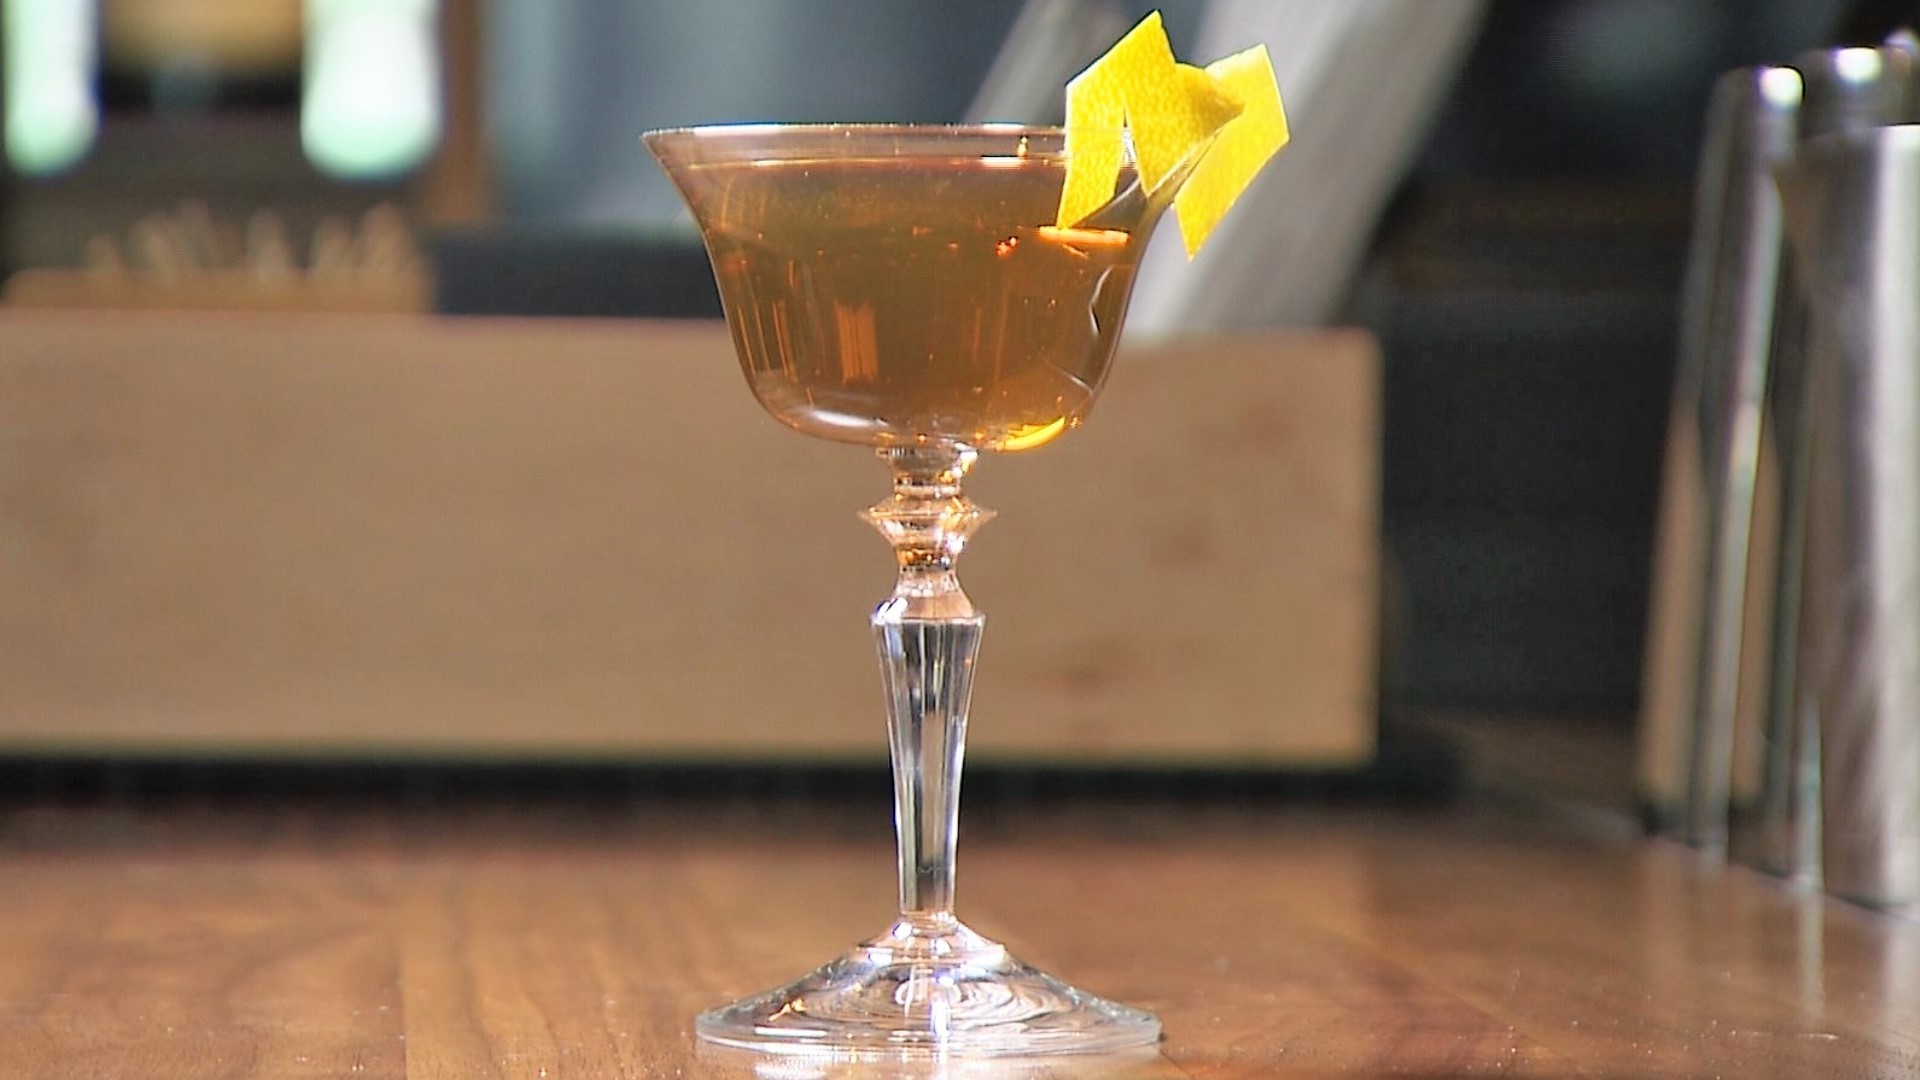 Fog Room serves the 'Splendor Tipperary' - a featured drink for Seattle Cocktail Week